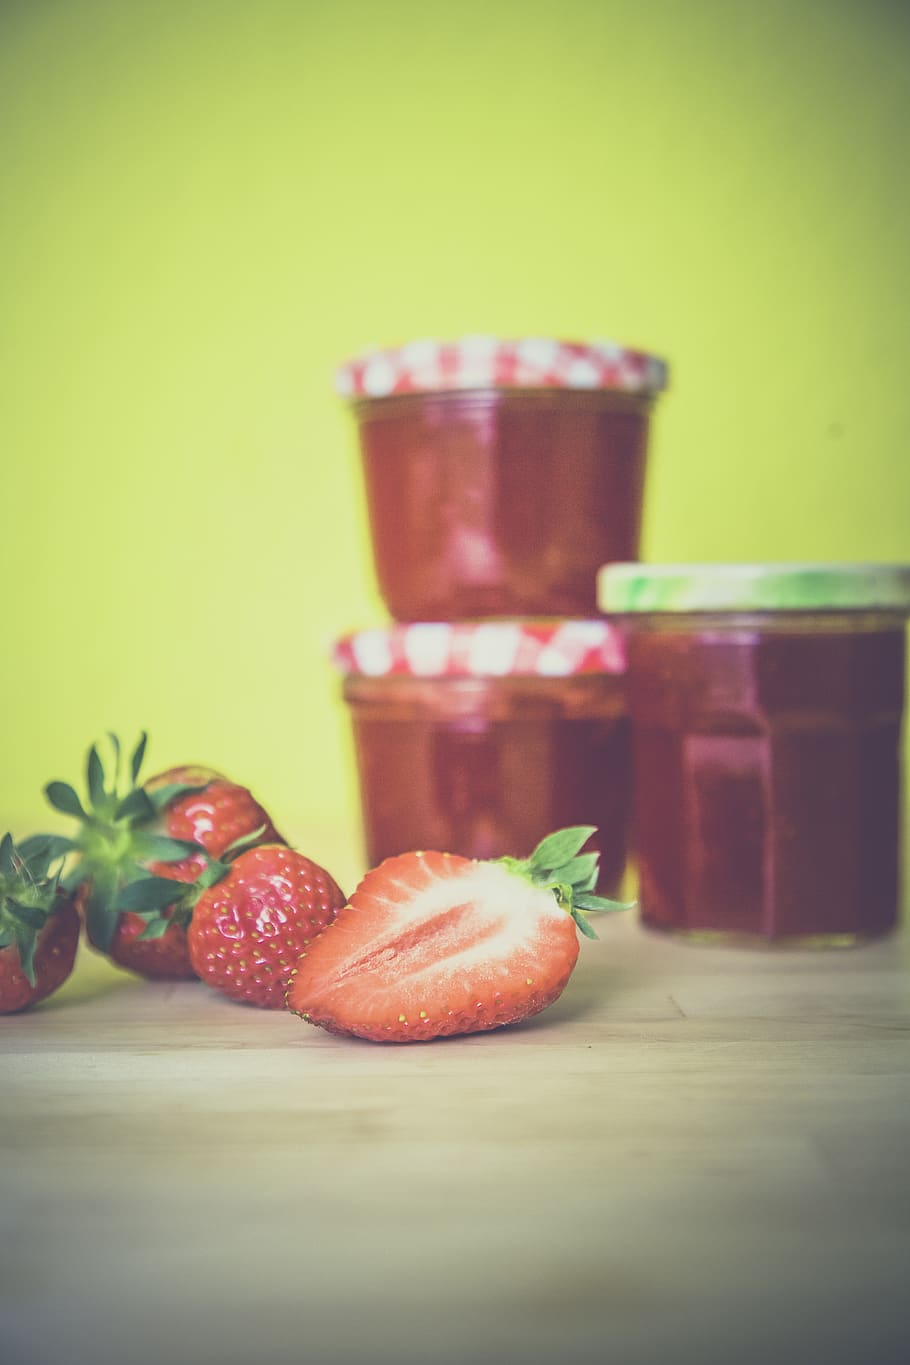 strawberry, fruit, food, dessert, jam, product, glass, jar, food and drink, healthy eating